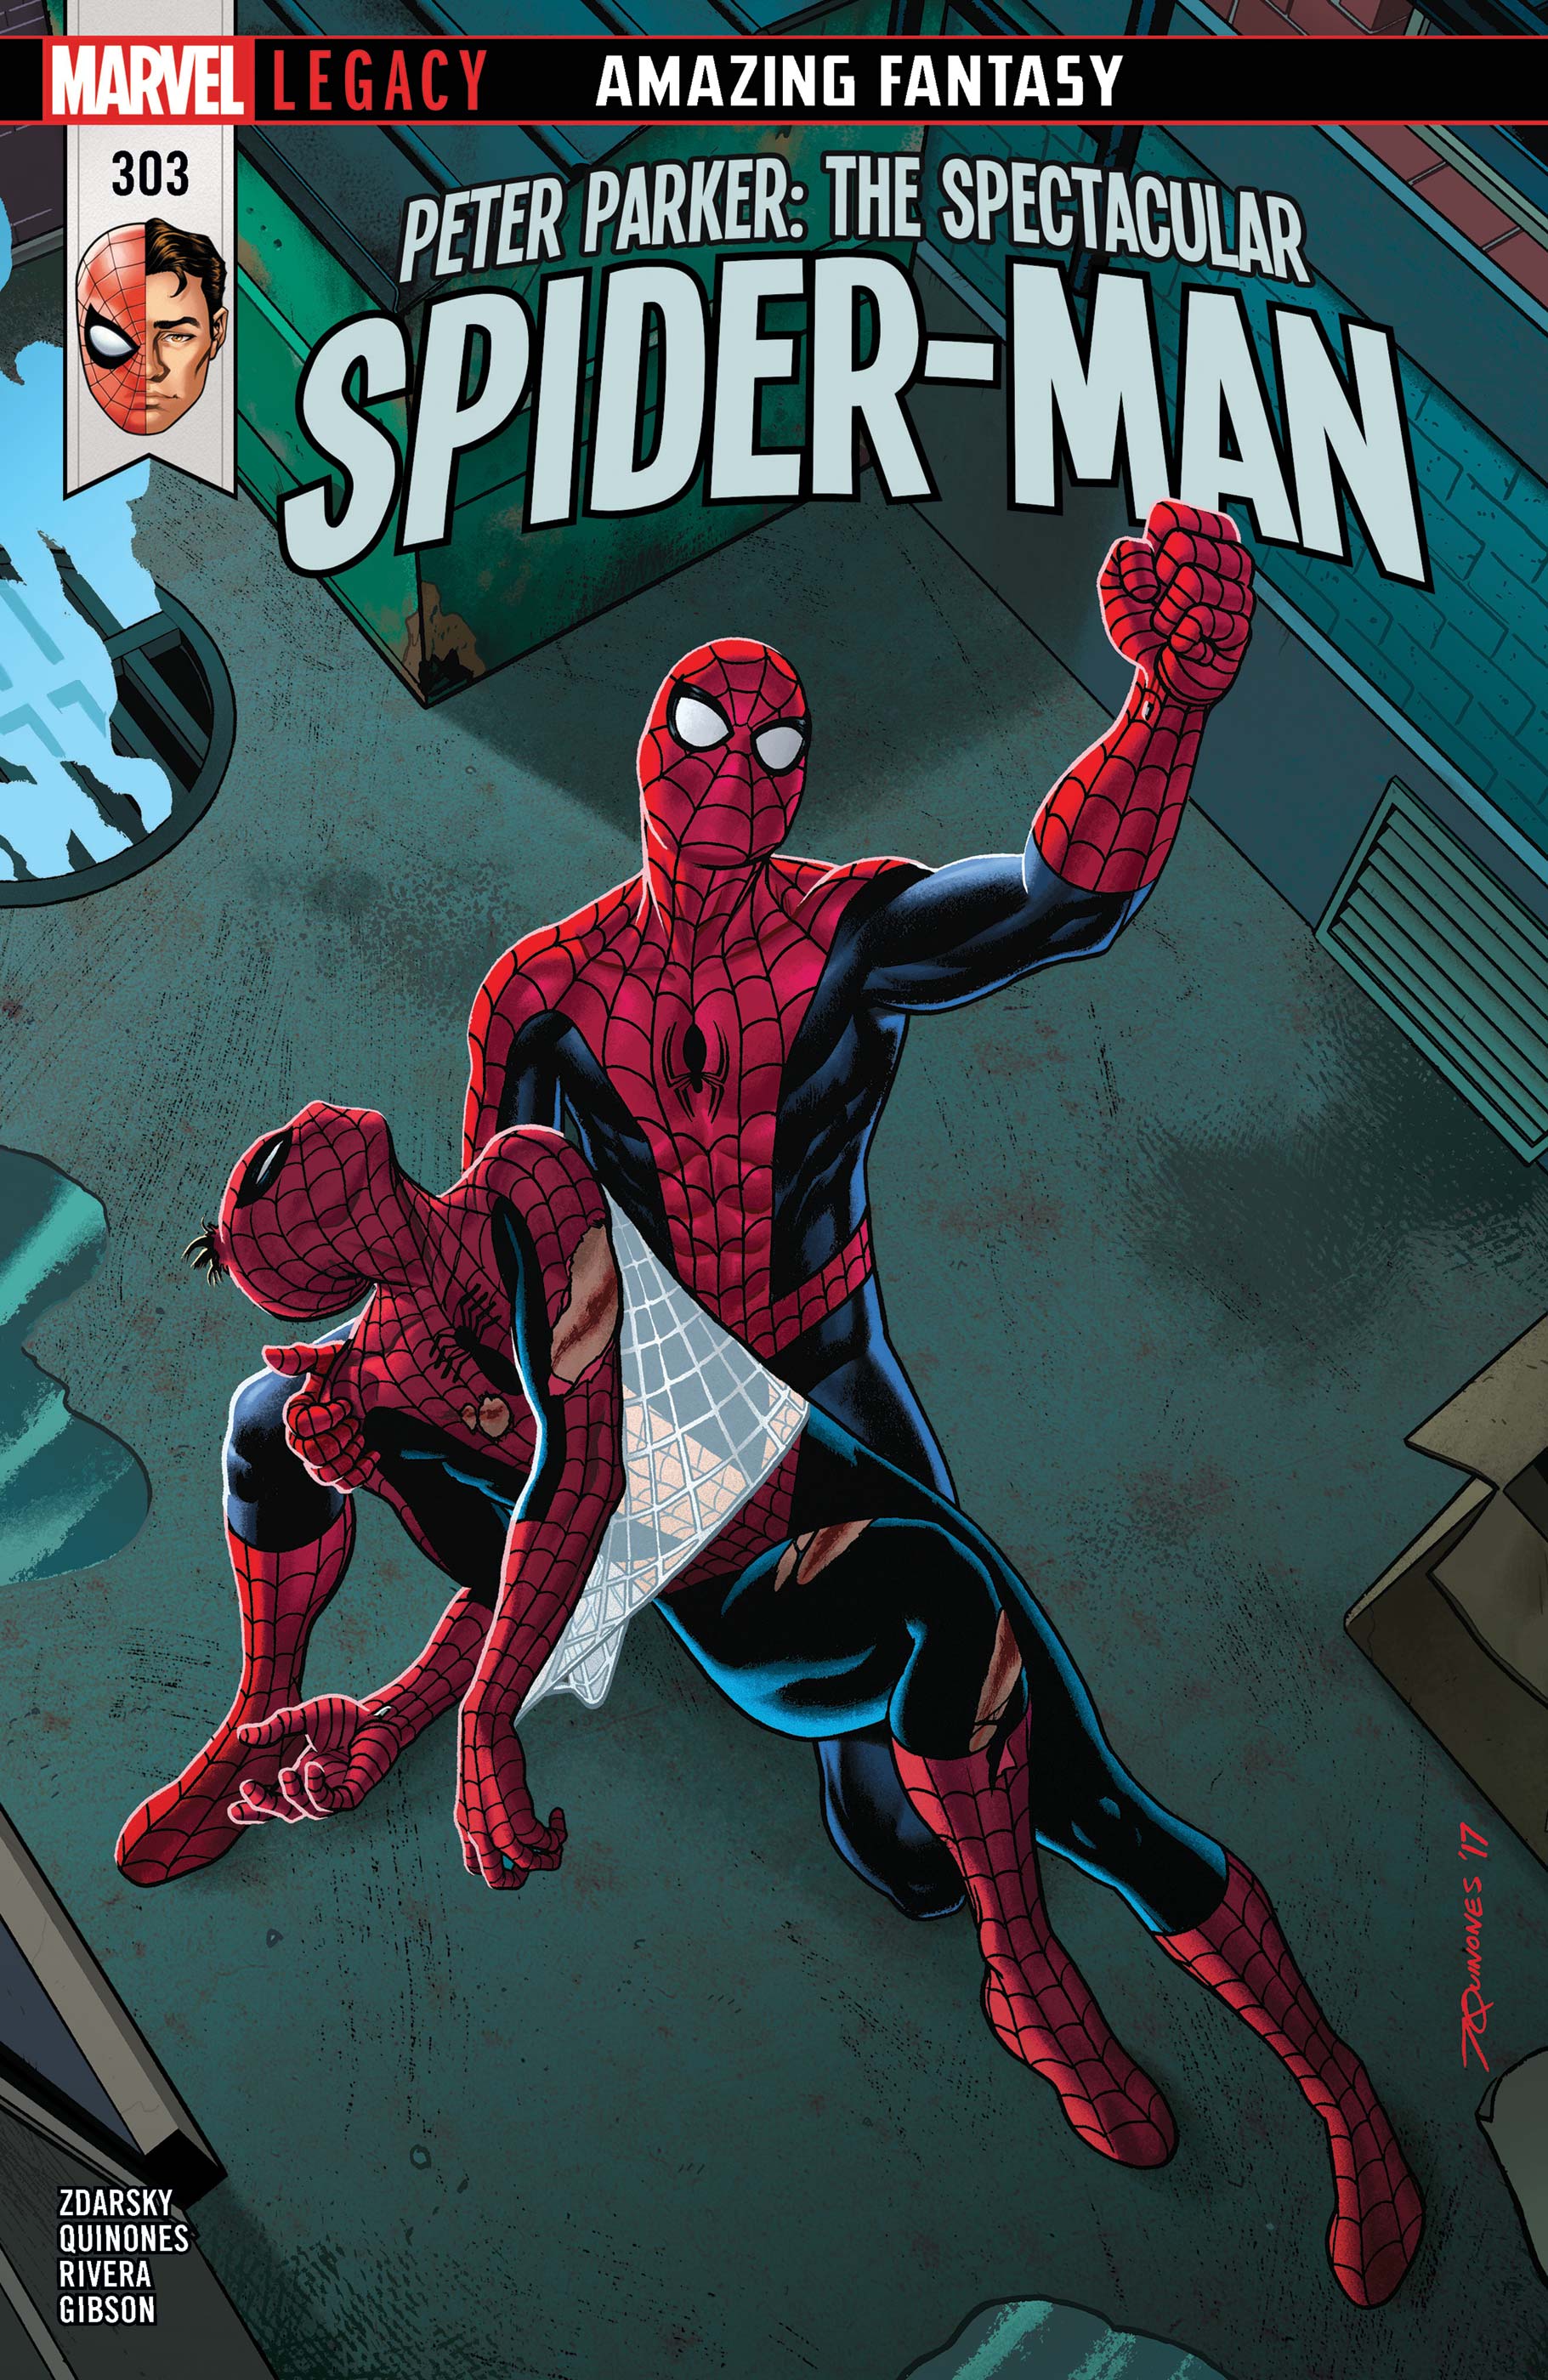 Peter Parker: The Spectacular Spider-Man (2017) #303 | Comic Issues | Marvel